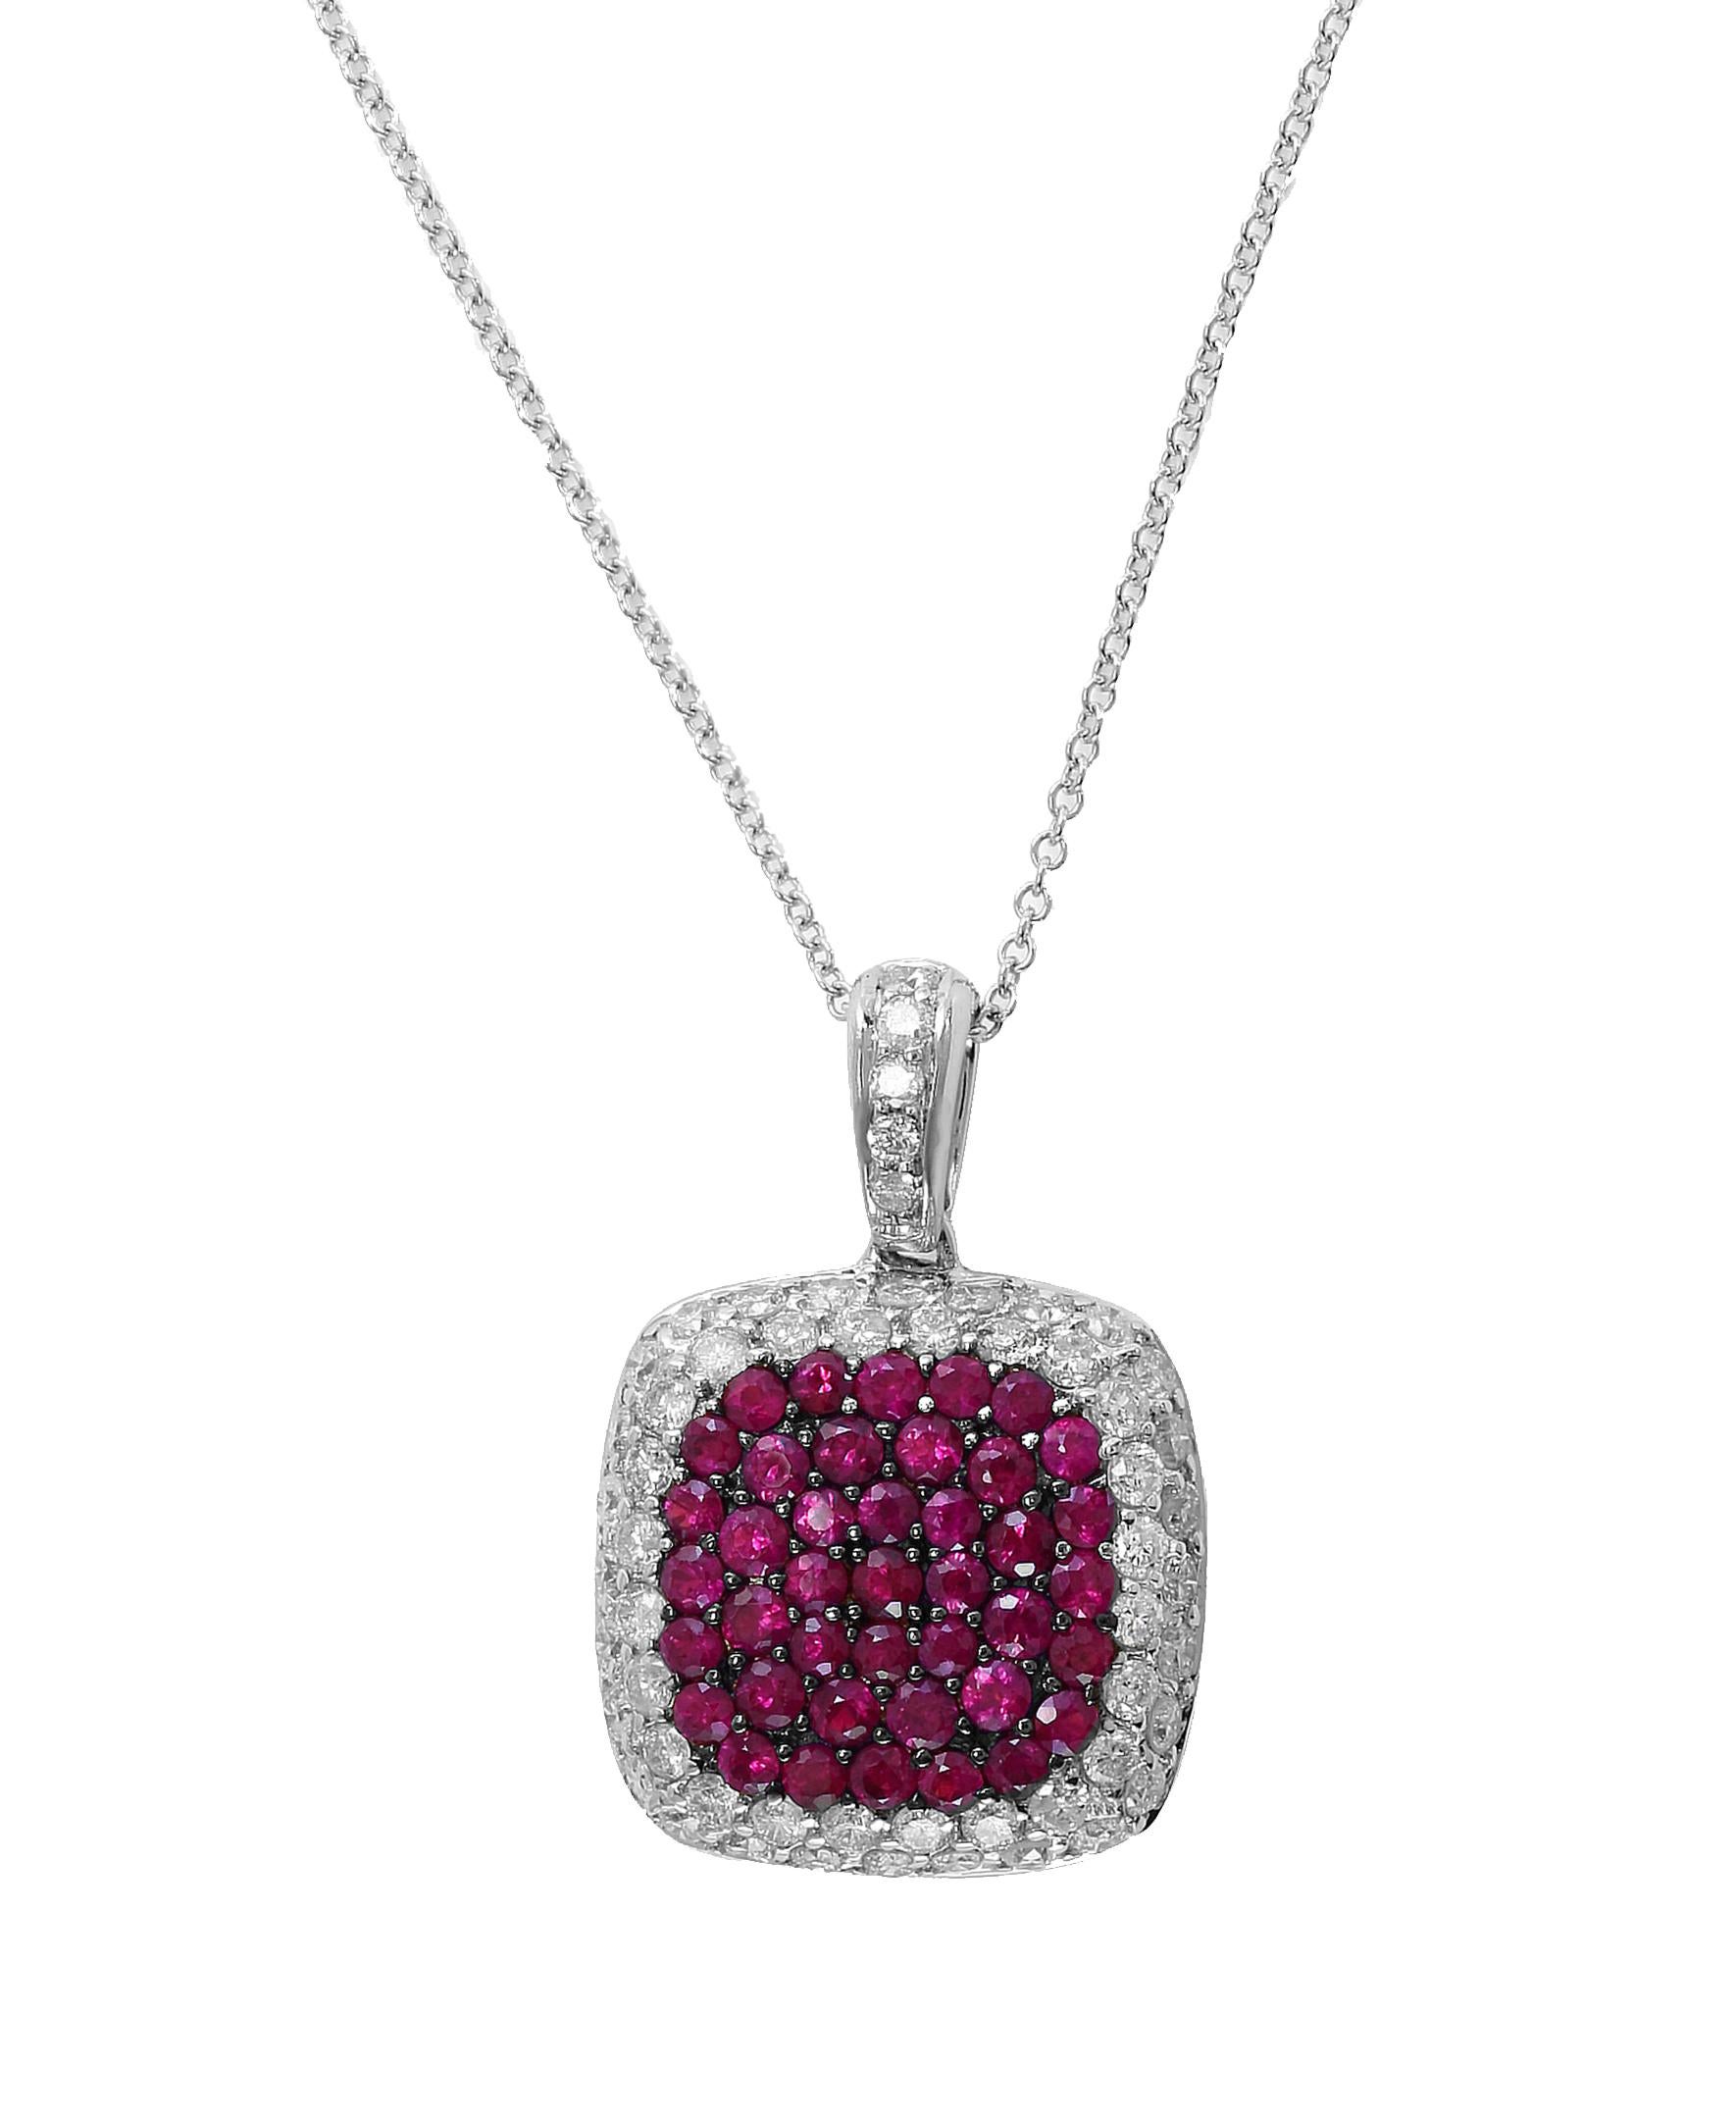 Designer Effy's Natural Ruby & Diamond Pendant /Necklace 14 Karat White Gold with chain

This spectacular Pendant Necklace consisting of 0.43 ct of natural round ruby and 0.57 Carats of brilliant round cut diamonds .
Total Carat weight of the